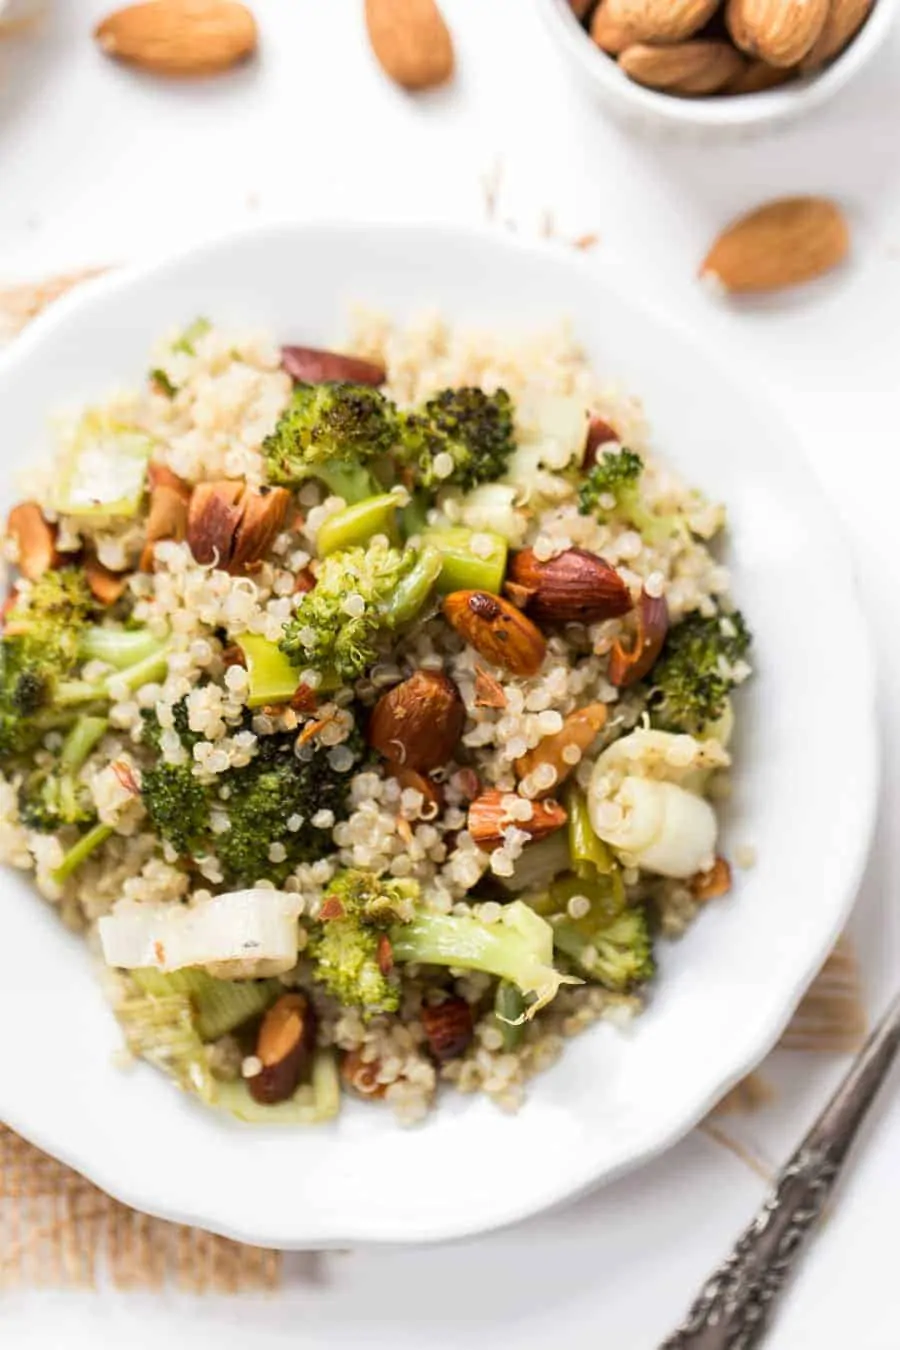 This Roasted Leek & Broccoli Quinoa Salad is the perfect summertime side dish! Grab what you need at the farmer's market and bring it to your next outdoor BBQ!